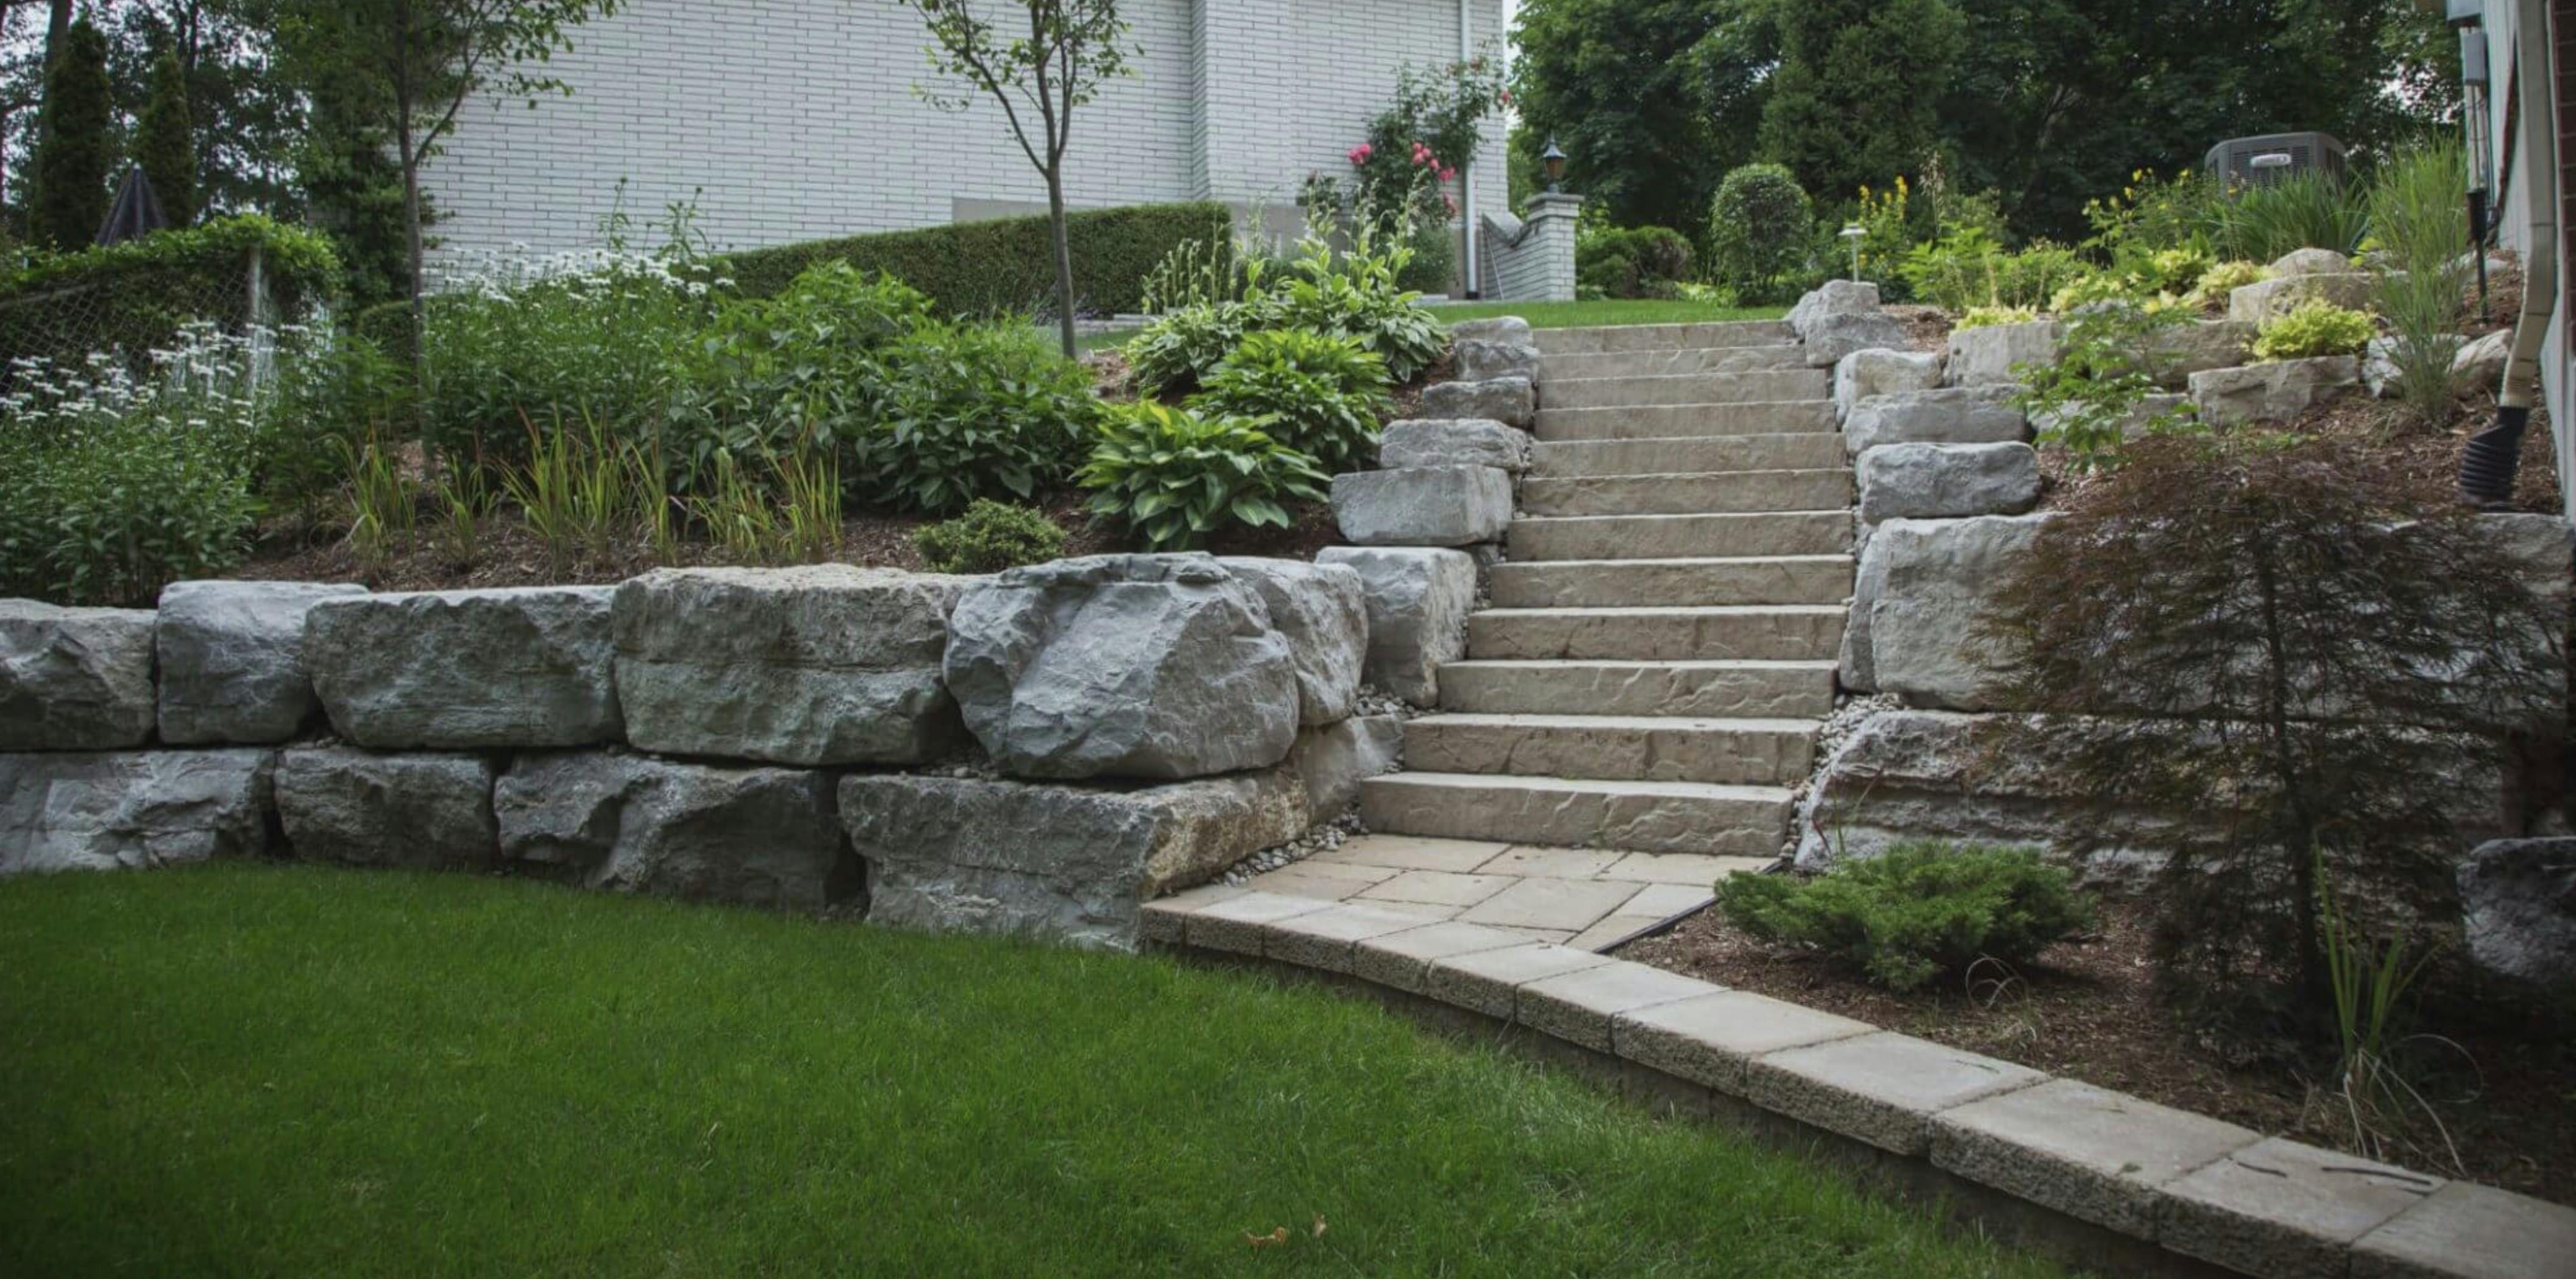 Twelve natural stone stairway leads up from lower backyard area to upper backyard area. Large natural stone blocks flank the stairway on both sides and provide a retaining wall at the edge of the lower yard. Garden containing a variety of plants flank both sides of the staircase. 